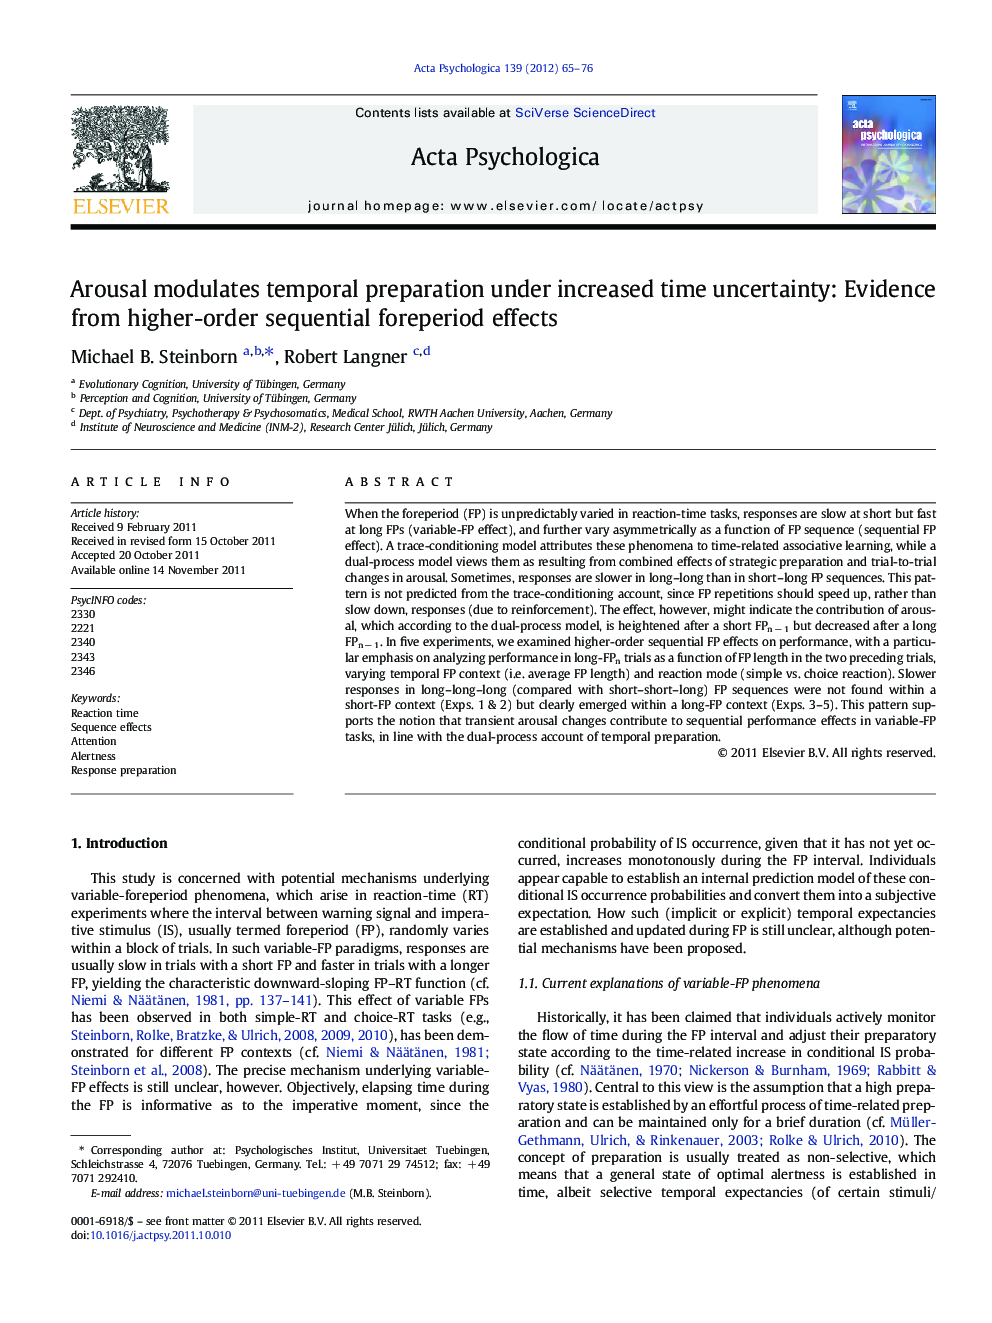 Arousal modulates temporal preparation under increased time uncertainty: Evidence from higher-order sequential foreperiod effects